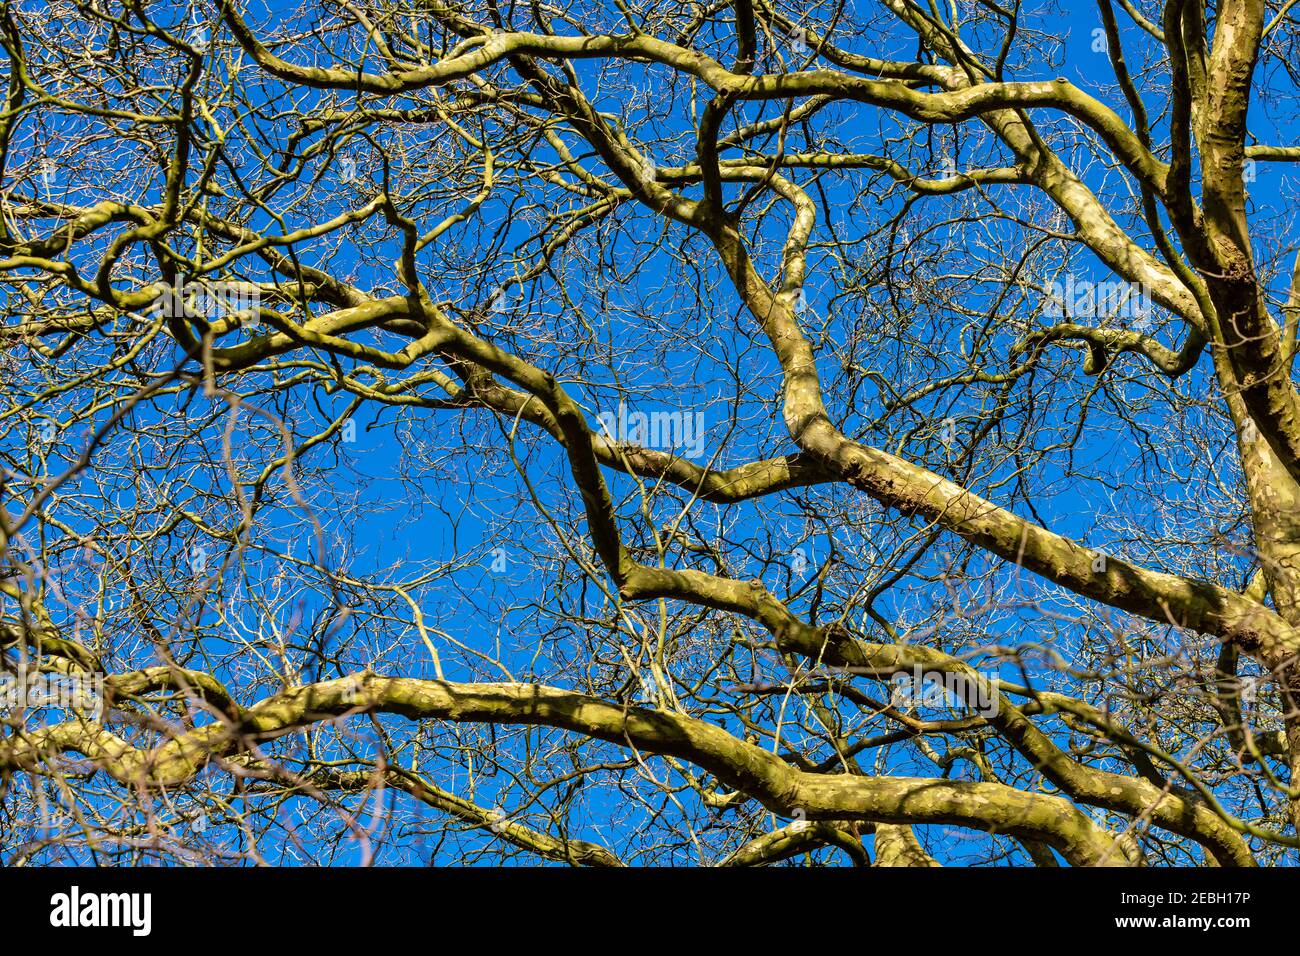 Branches intertwined on a tree with a deep blue sky behind. Lit with a low winter sun. Stock Photo